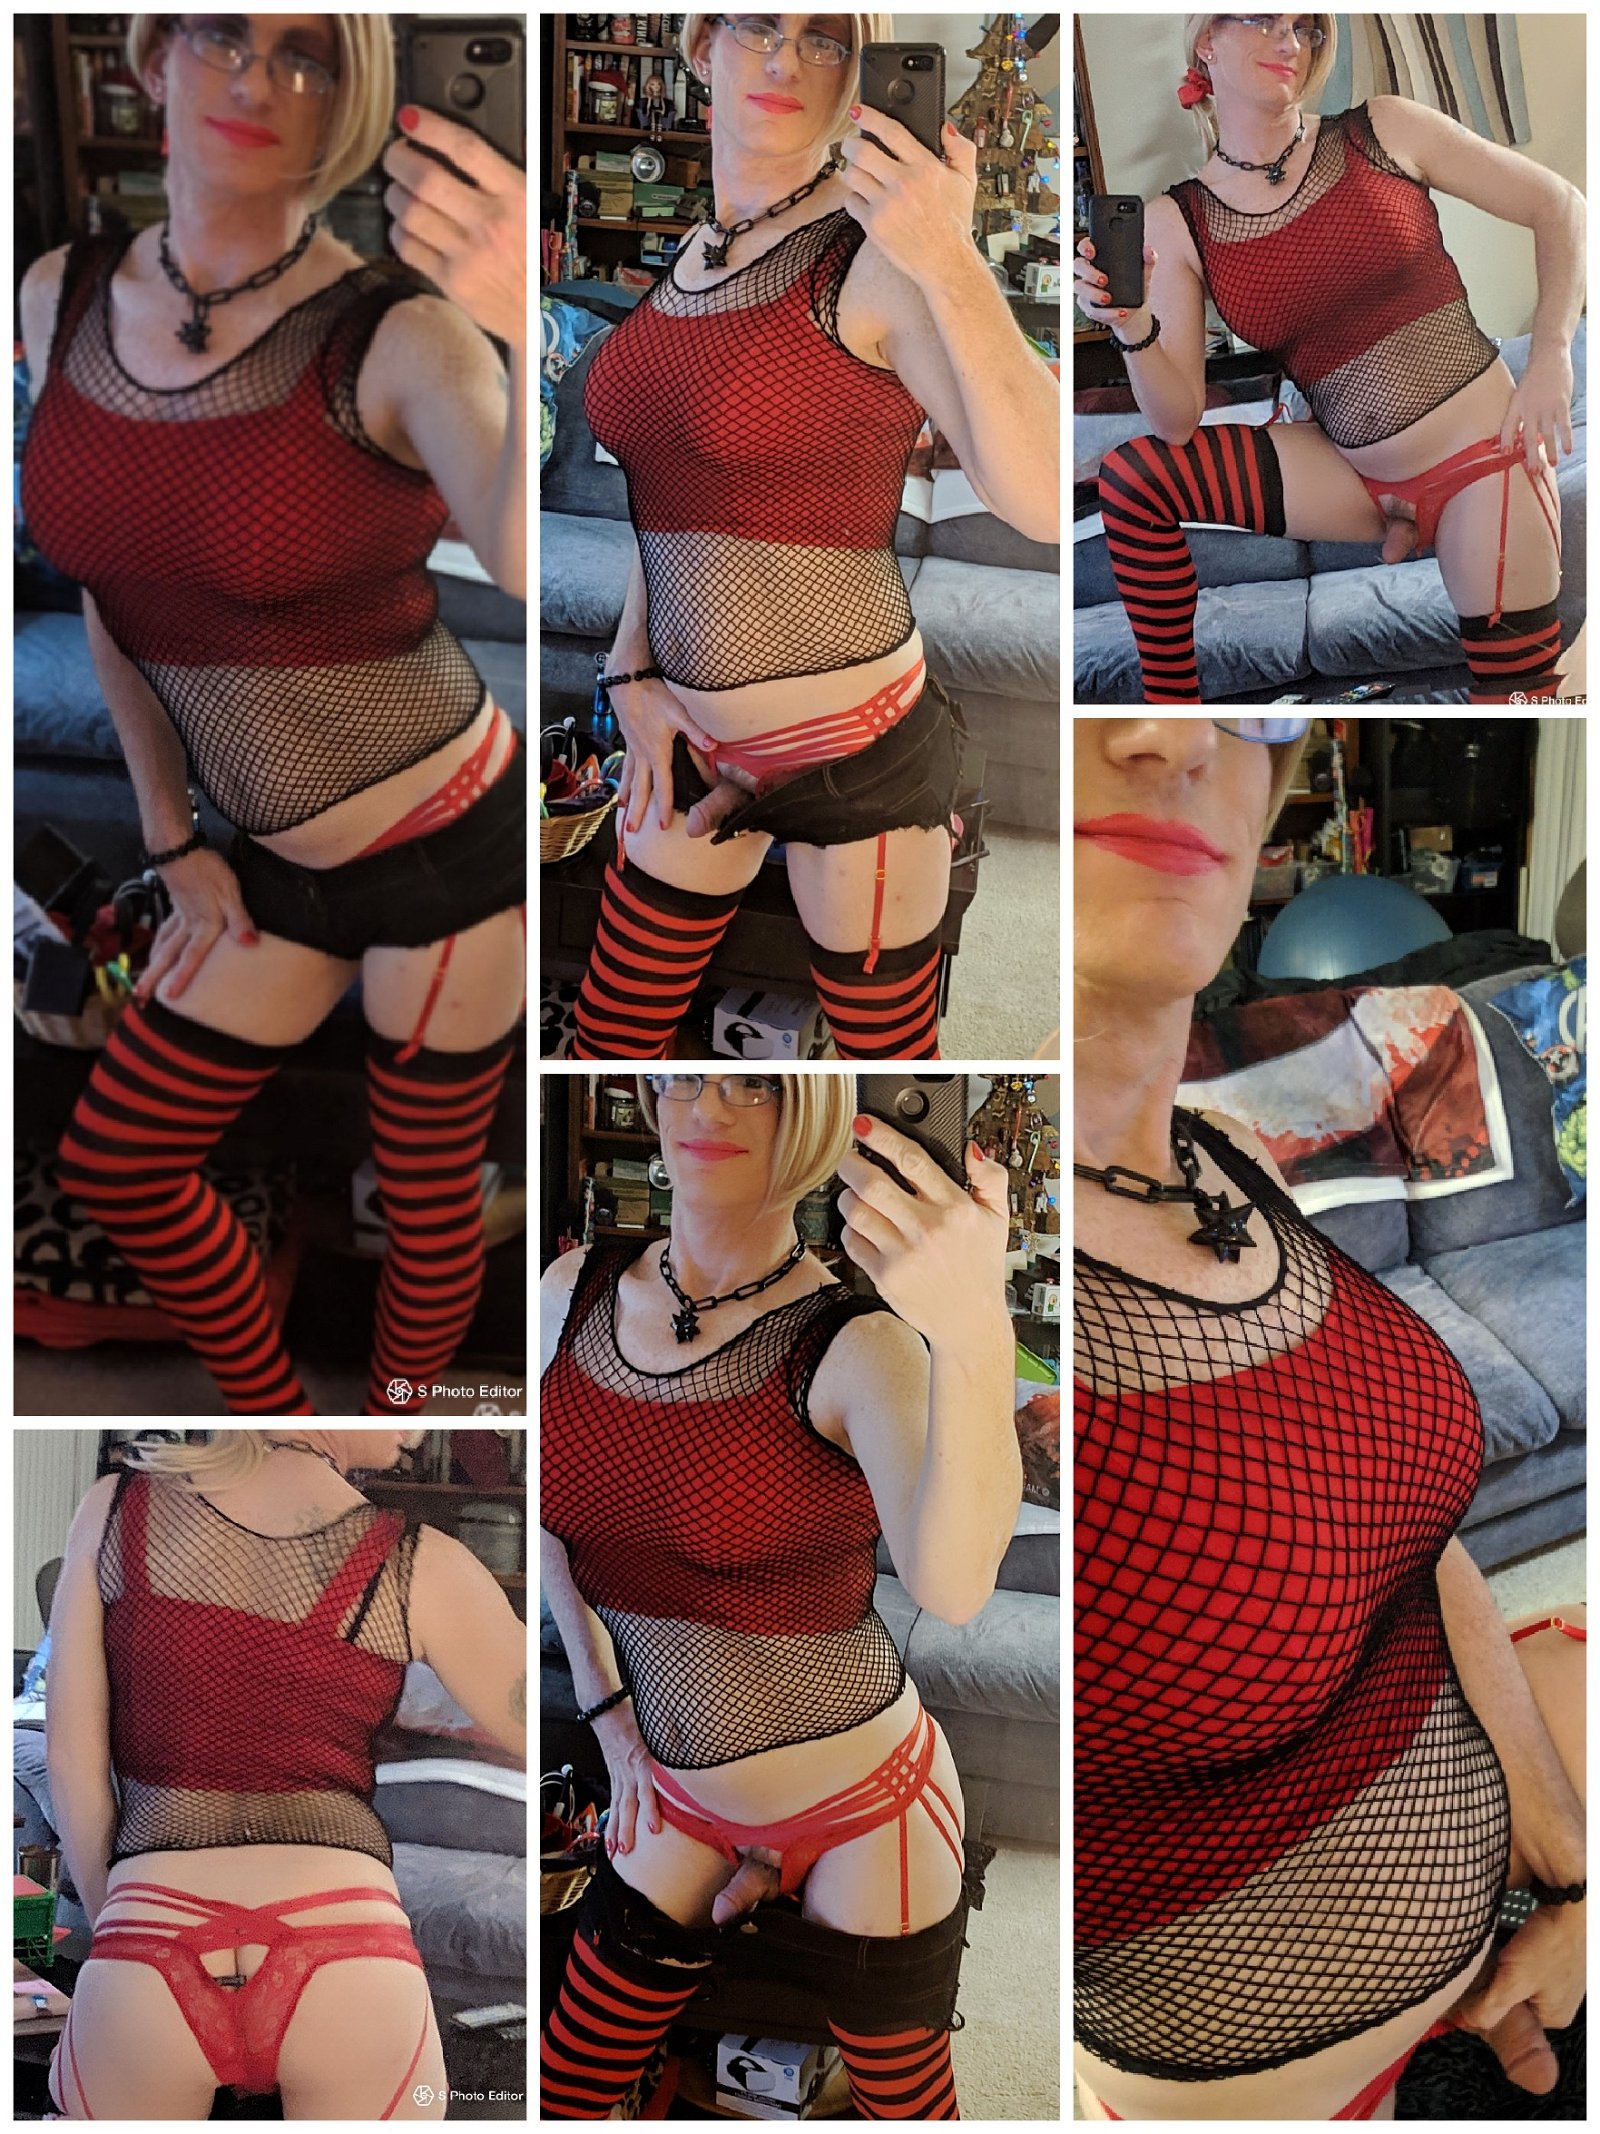 Photo by JessietheCDslut with the username @JessietheCDslut, who is a verified user,  December 28, 2018 at 6:42 PM. The post is about the topic Crossdressing sluts and the text says 'A new set! Staying a little festive in red!'